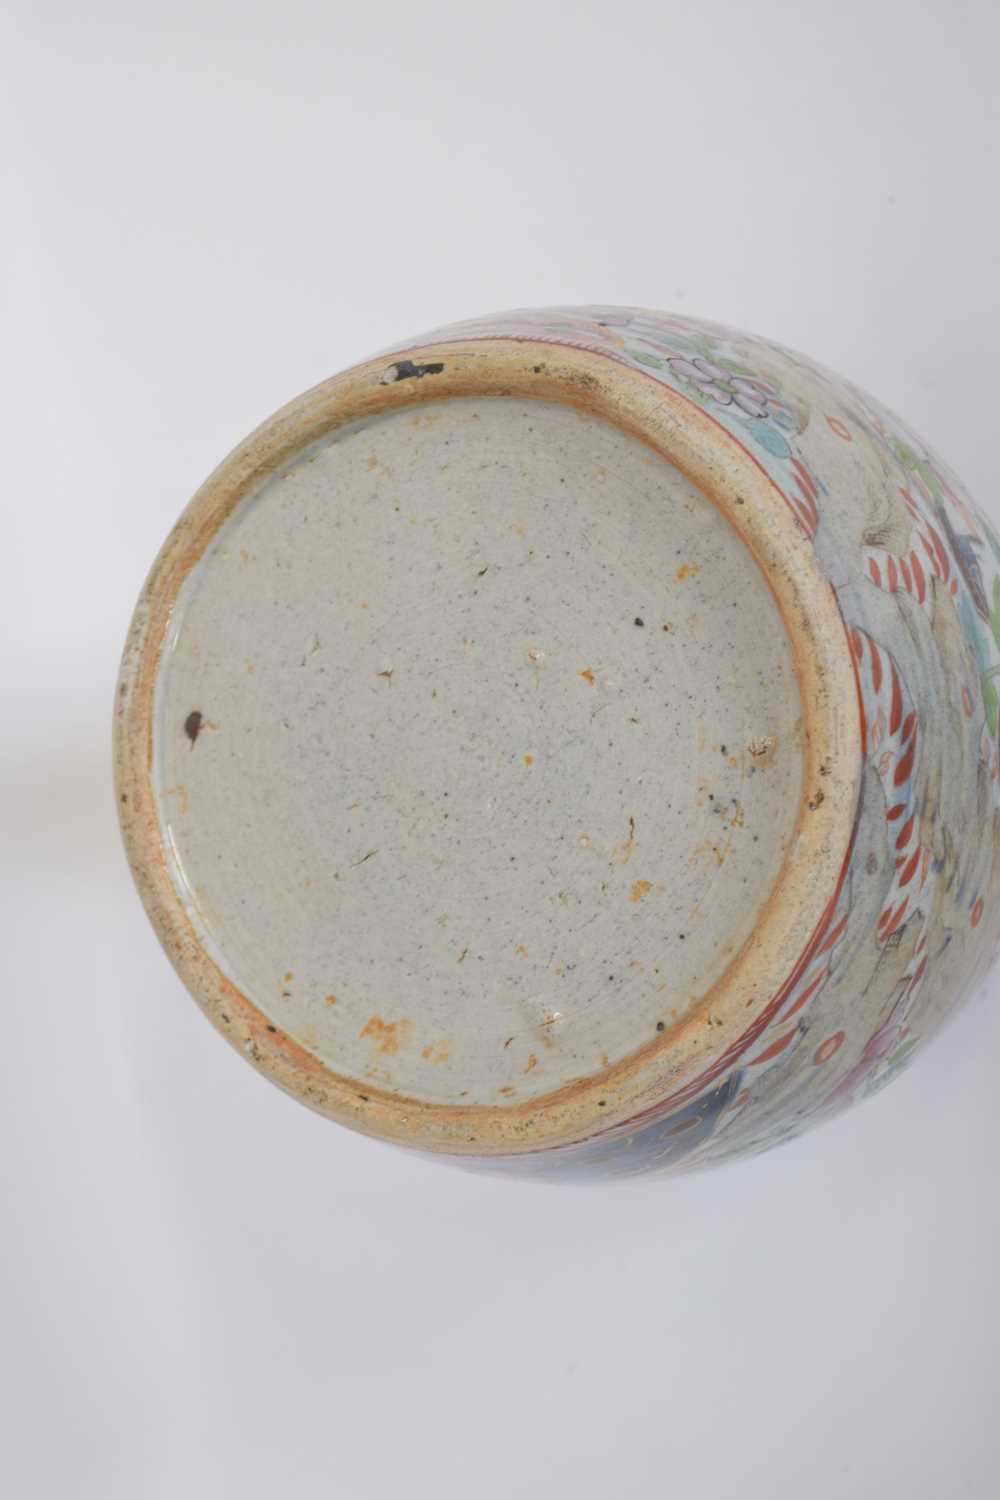 Late 18th/early 19th century Chinese porcelain ginger jar with overglaze European decoration - Image 6 of 6